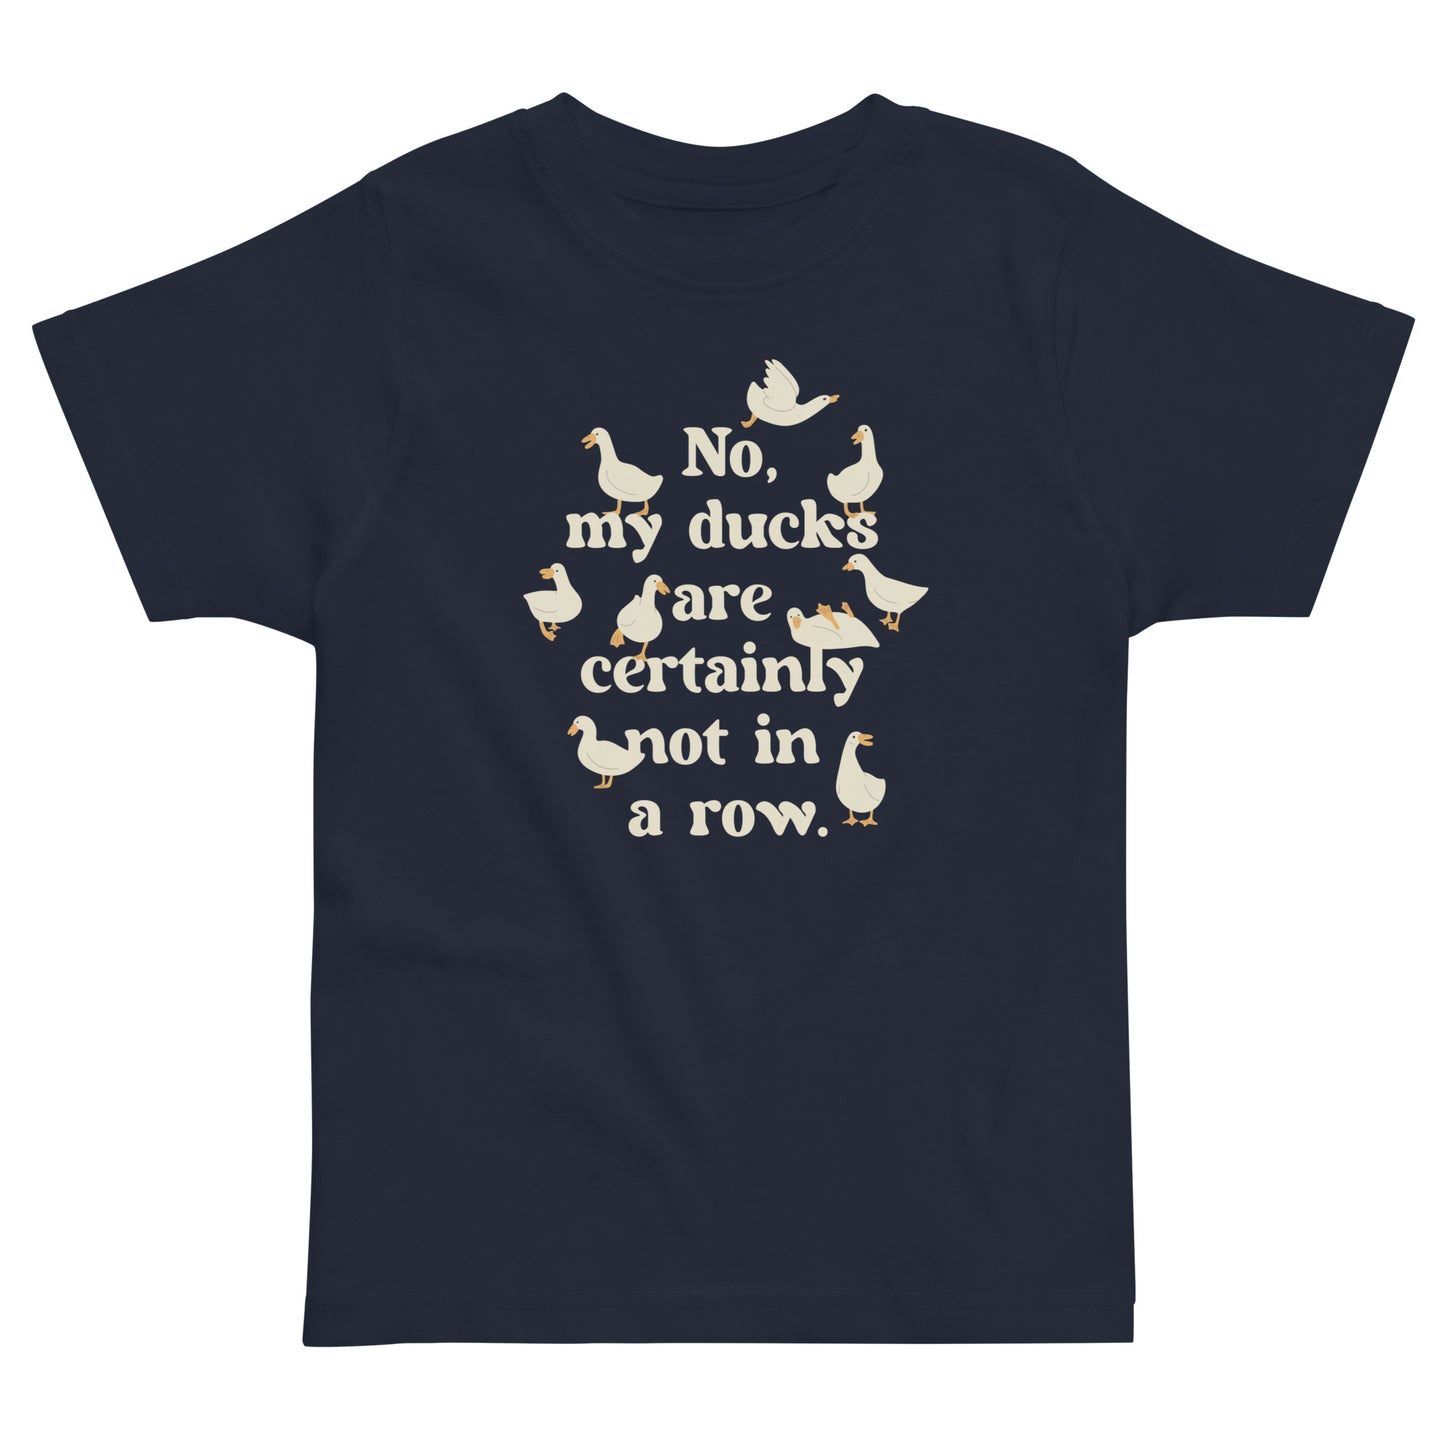 No, My Ducks Are Certainly Not In A Row Kid's Toddler Tee